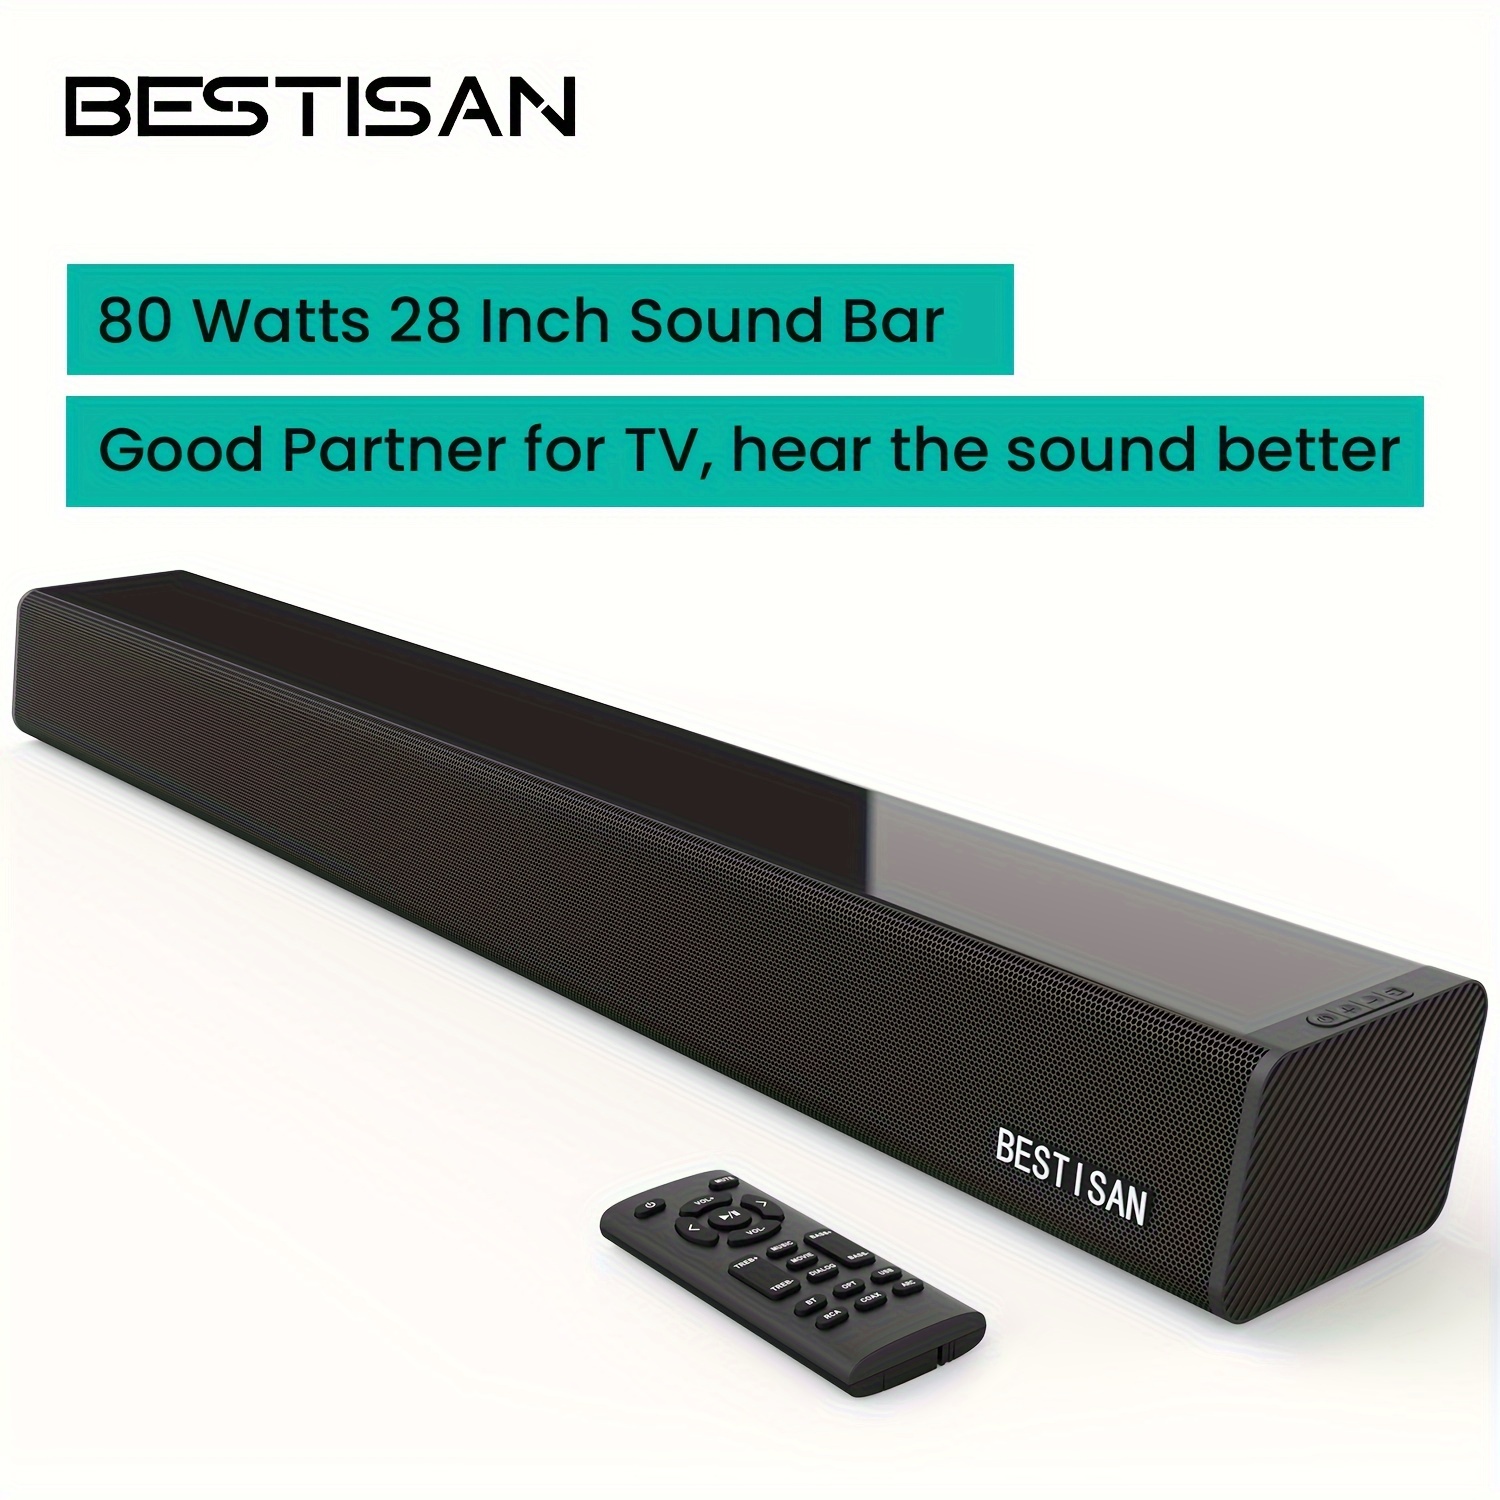 

Soundbar 28-inch 80w With Arc, Bt 5.0, Optical Coaxial Usb Aux Connection, 4 Speakers, 3 Eqs, 110db Surround Sound Bar Home Theater Audio For Tv, Wall Mountable, Bass Adjustable